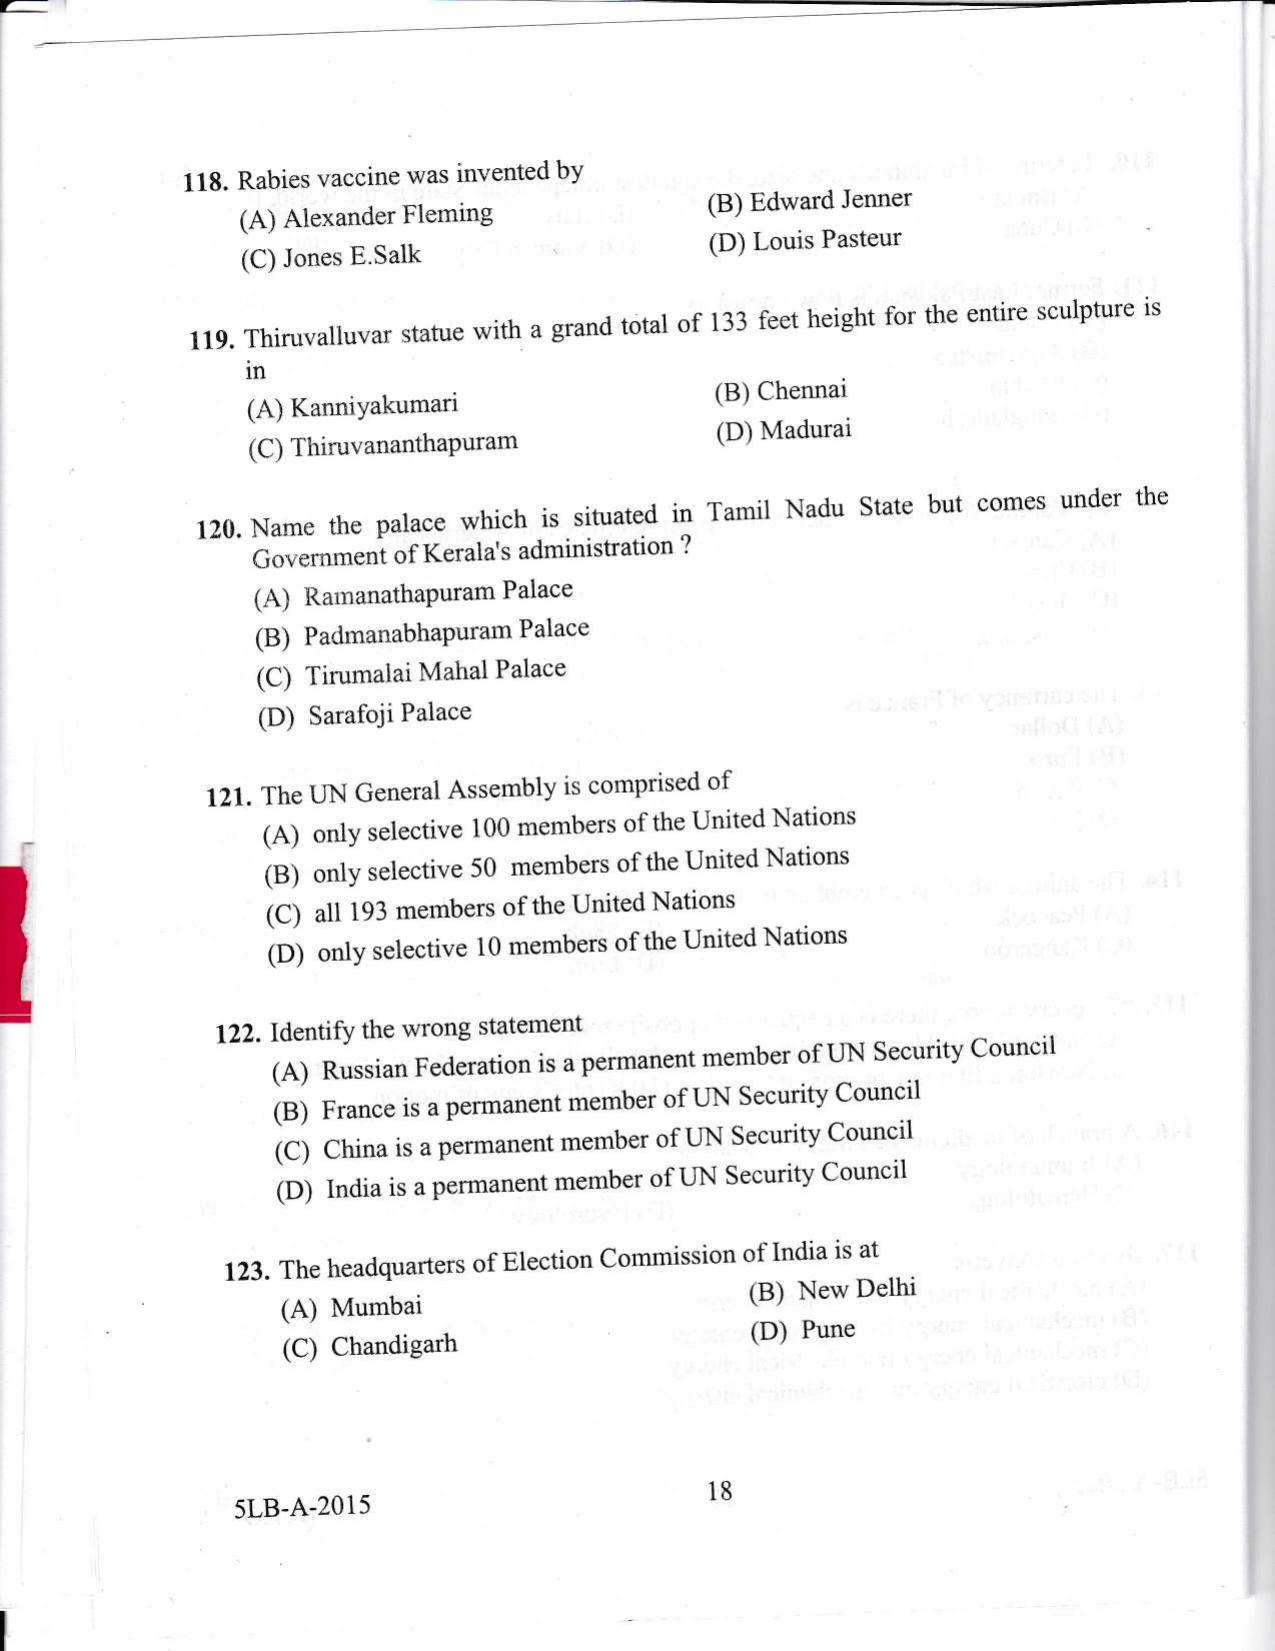 KLEE 5 Year LLB Exam 2015 Question Paper - Page 18